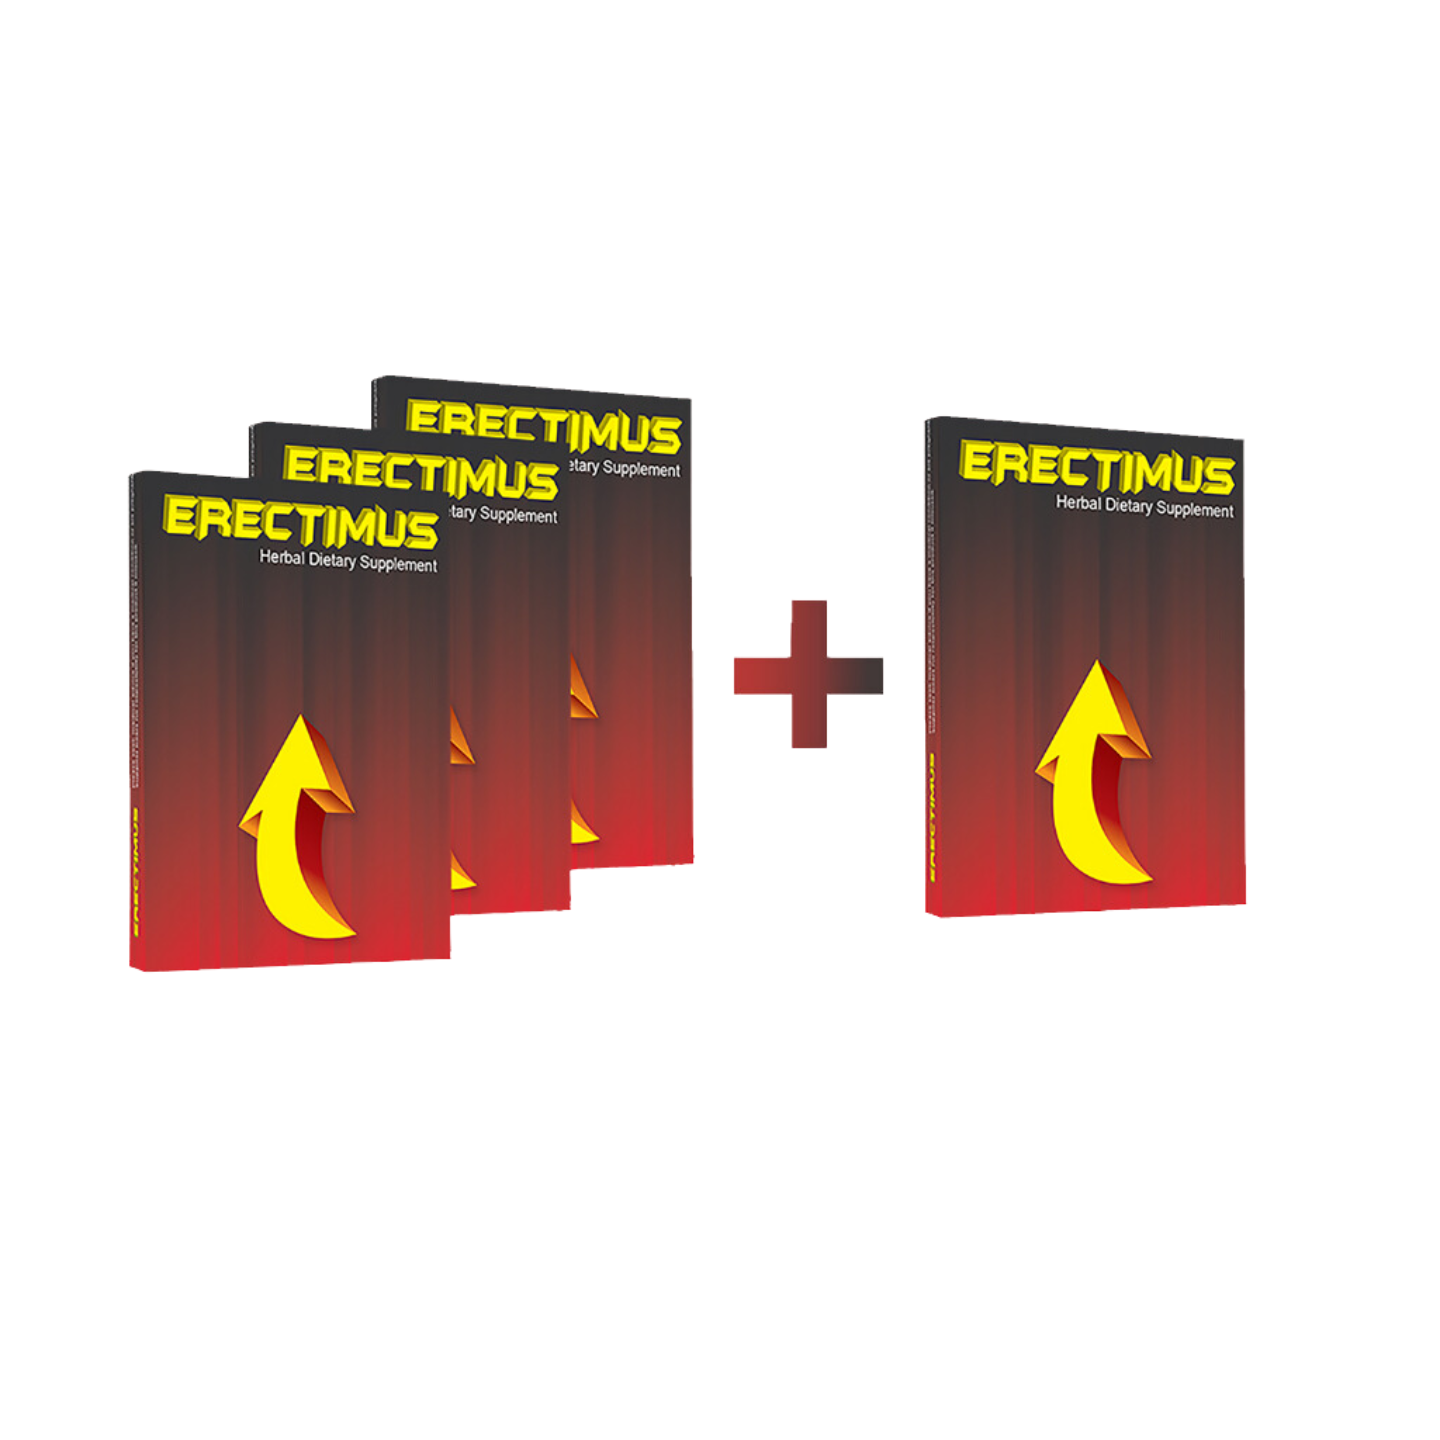 Erectimus - buy 3 packets get 1 free (40 herbal instant erection pills total)